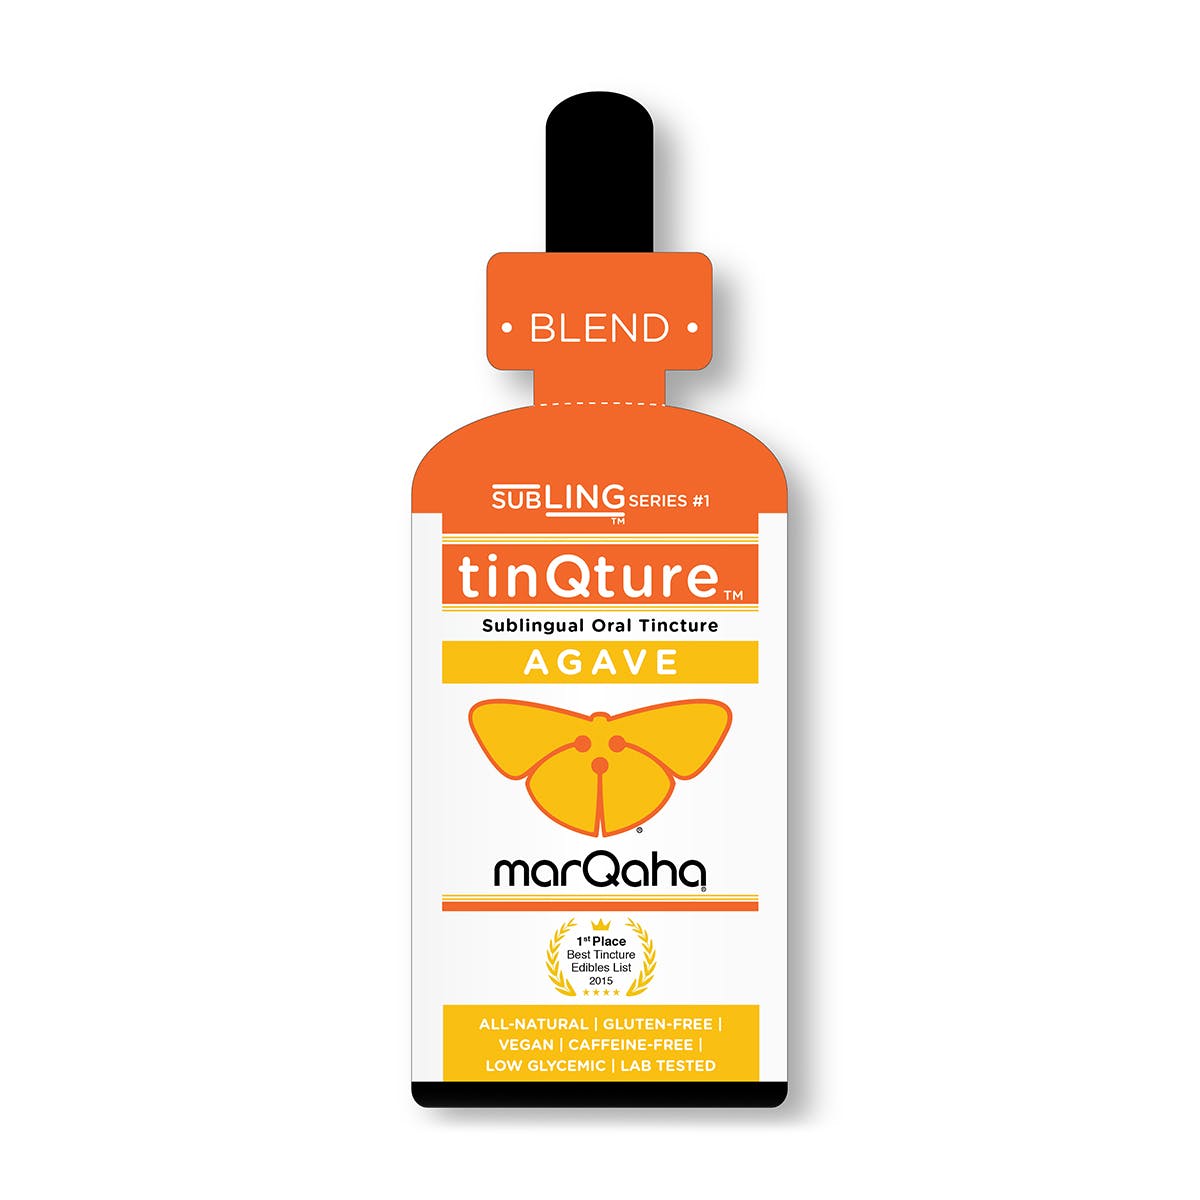 tincture-marqaha-agave-tinqture-blend-med